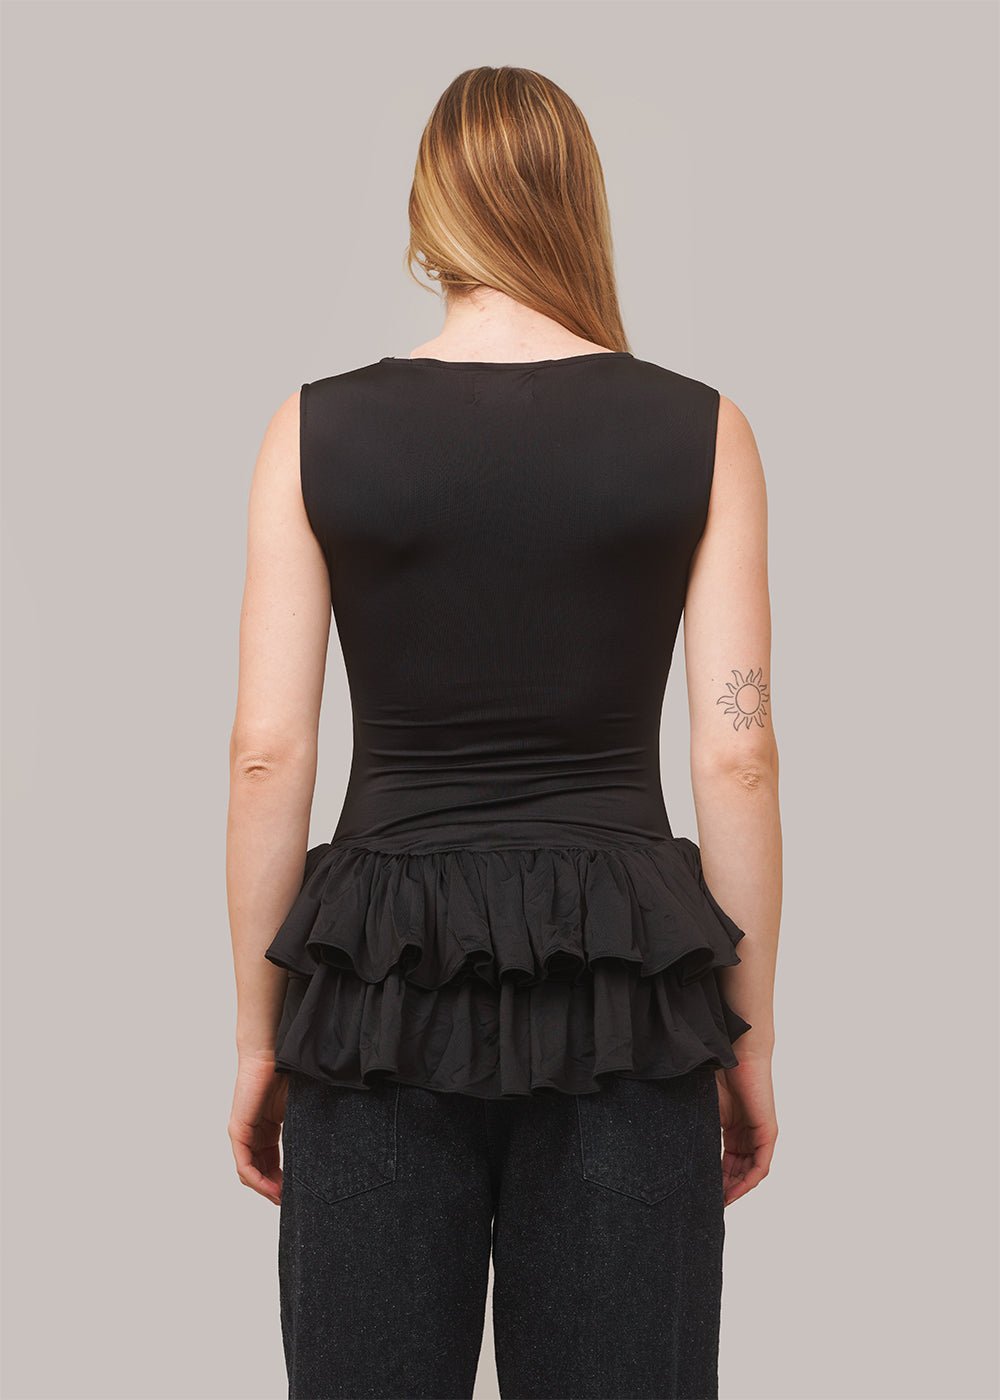 Belle The Label Black Ballerina Dress - New Classics Studios Sustainable Ethical Fashion Canada